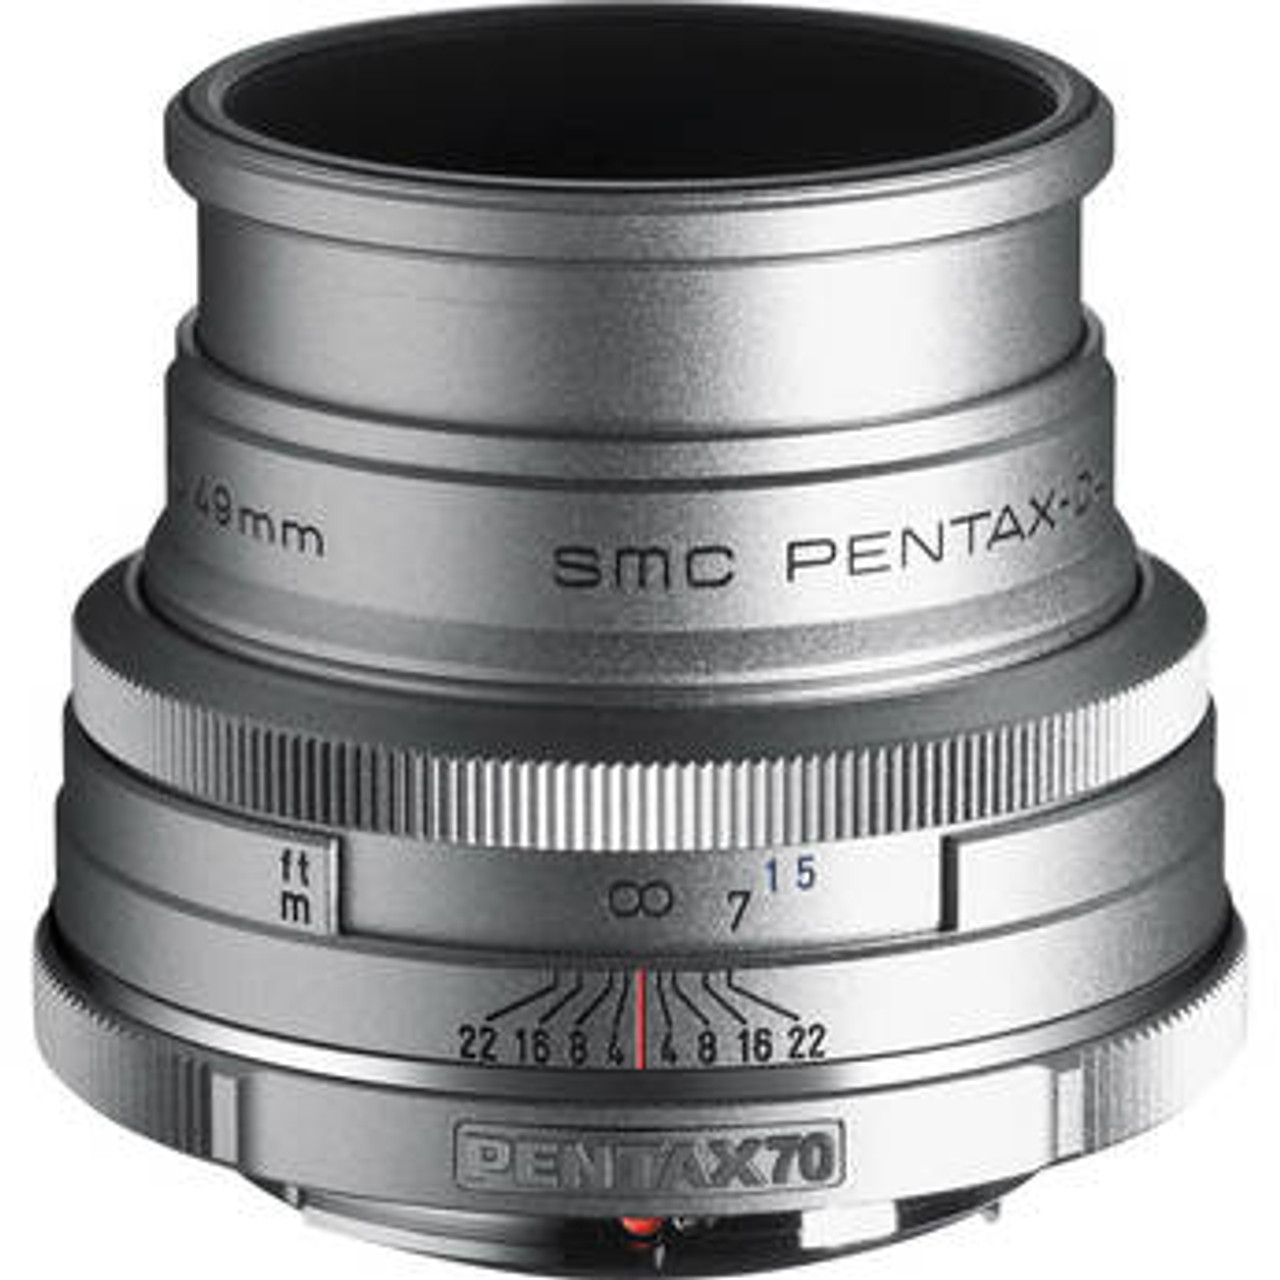 70mm F/2.4 SMCP-DA Limited Series (Silver) at Acephoto.net